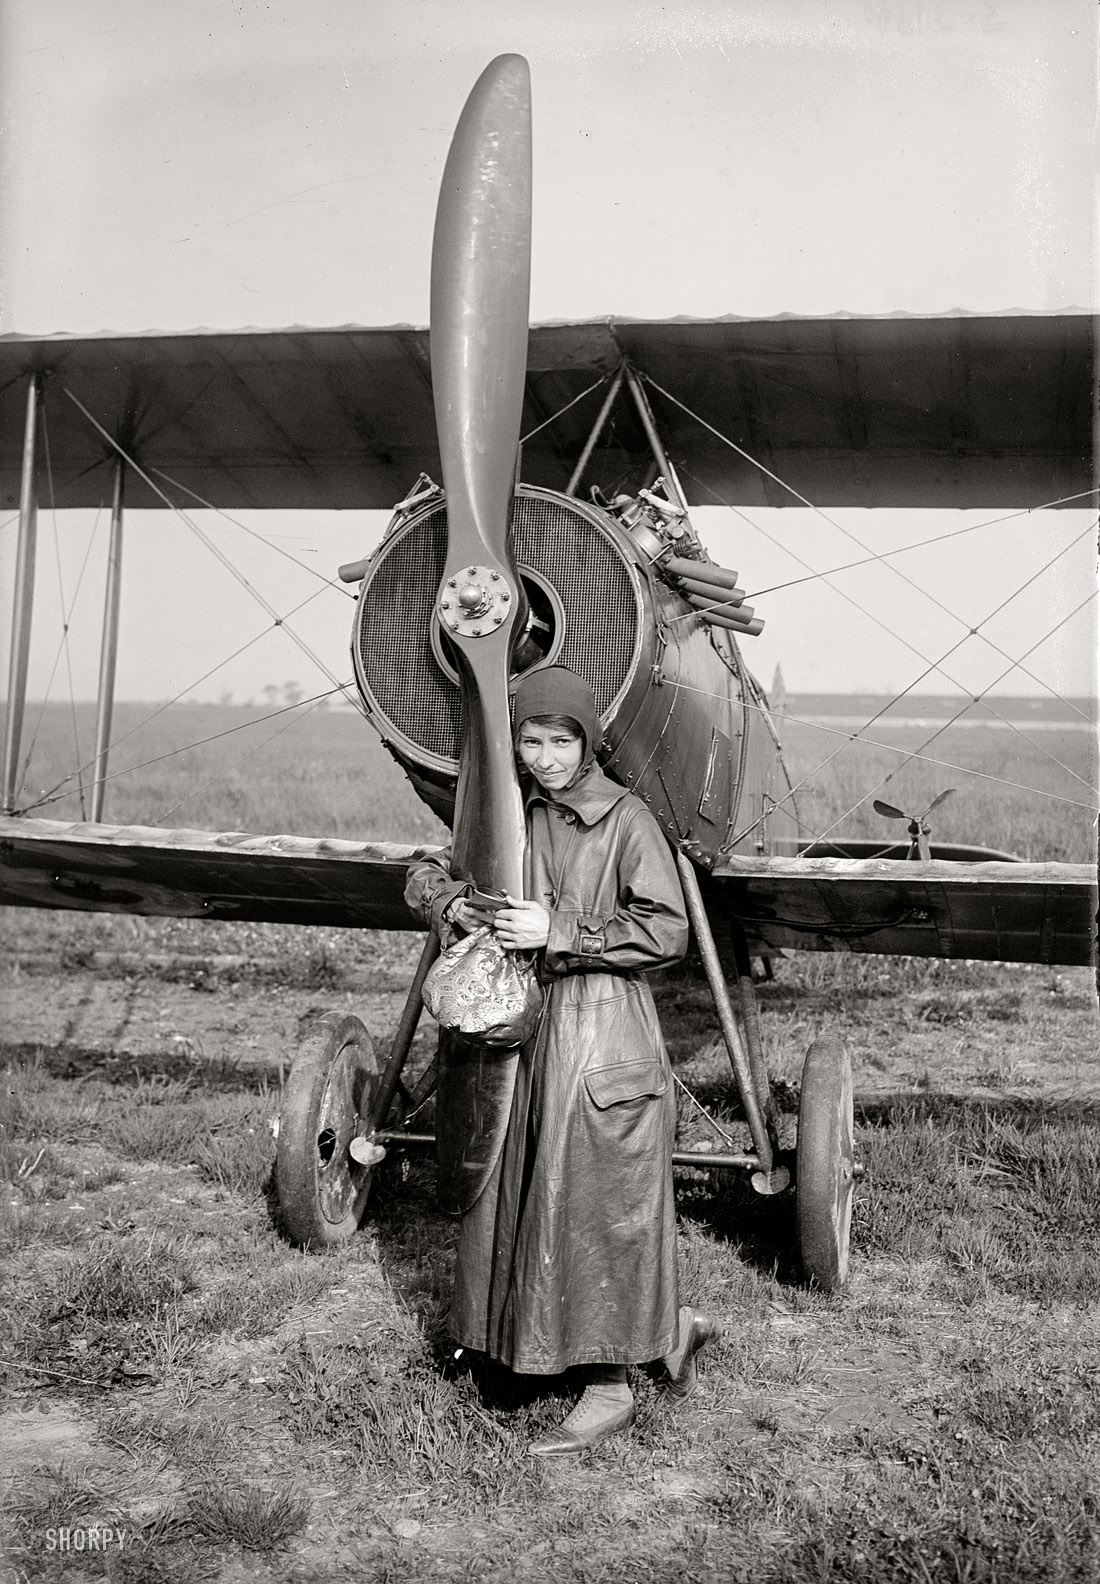 June 1, 1918. Katherine Stinson, "the flying schoolgirl," and her plane at Sheepshead Bay Speedway in Brooklyn after completing a flight from Chicago. 5x7 glass negative, George Grantham Bain Collection. View full size.